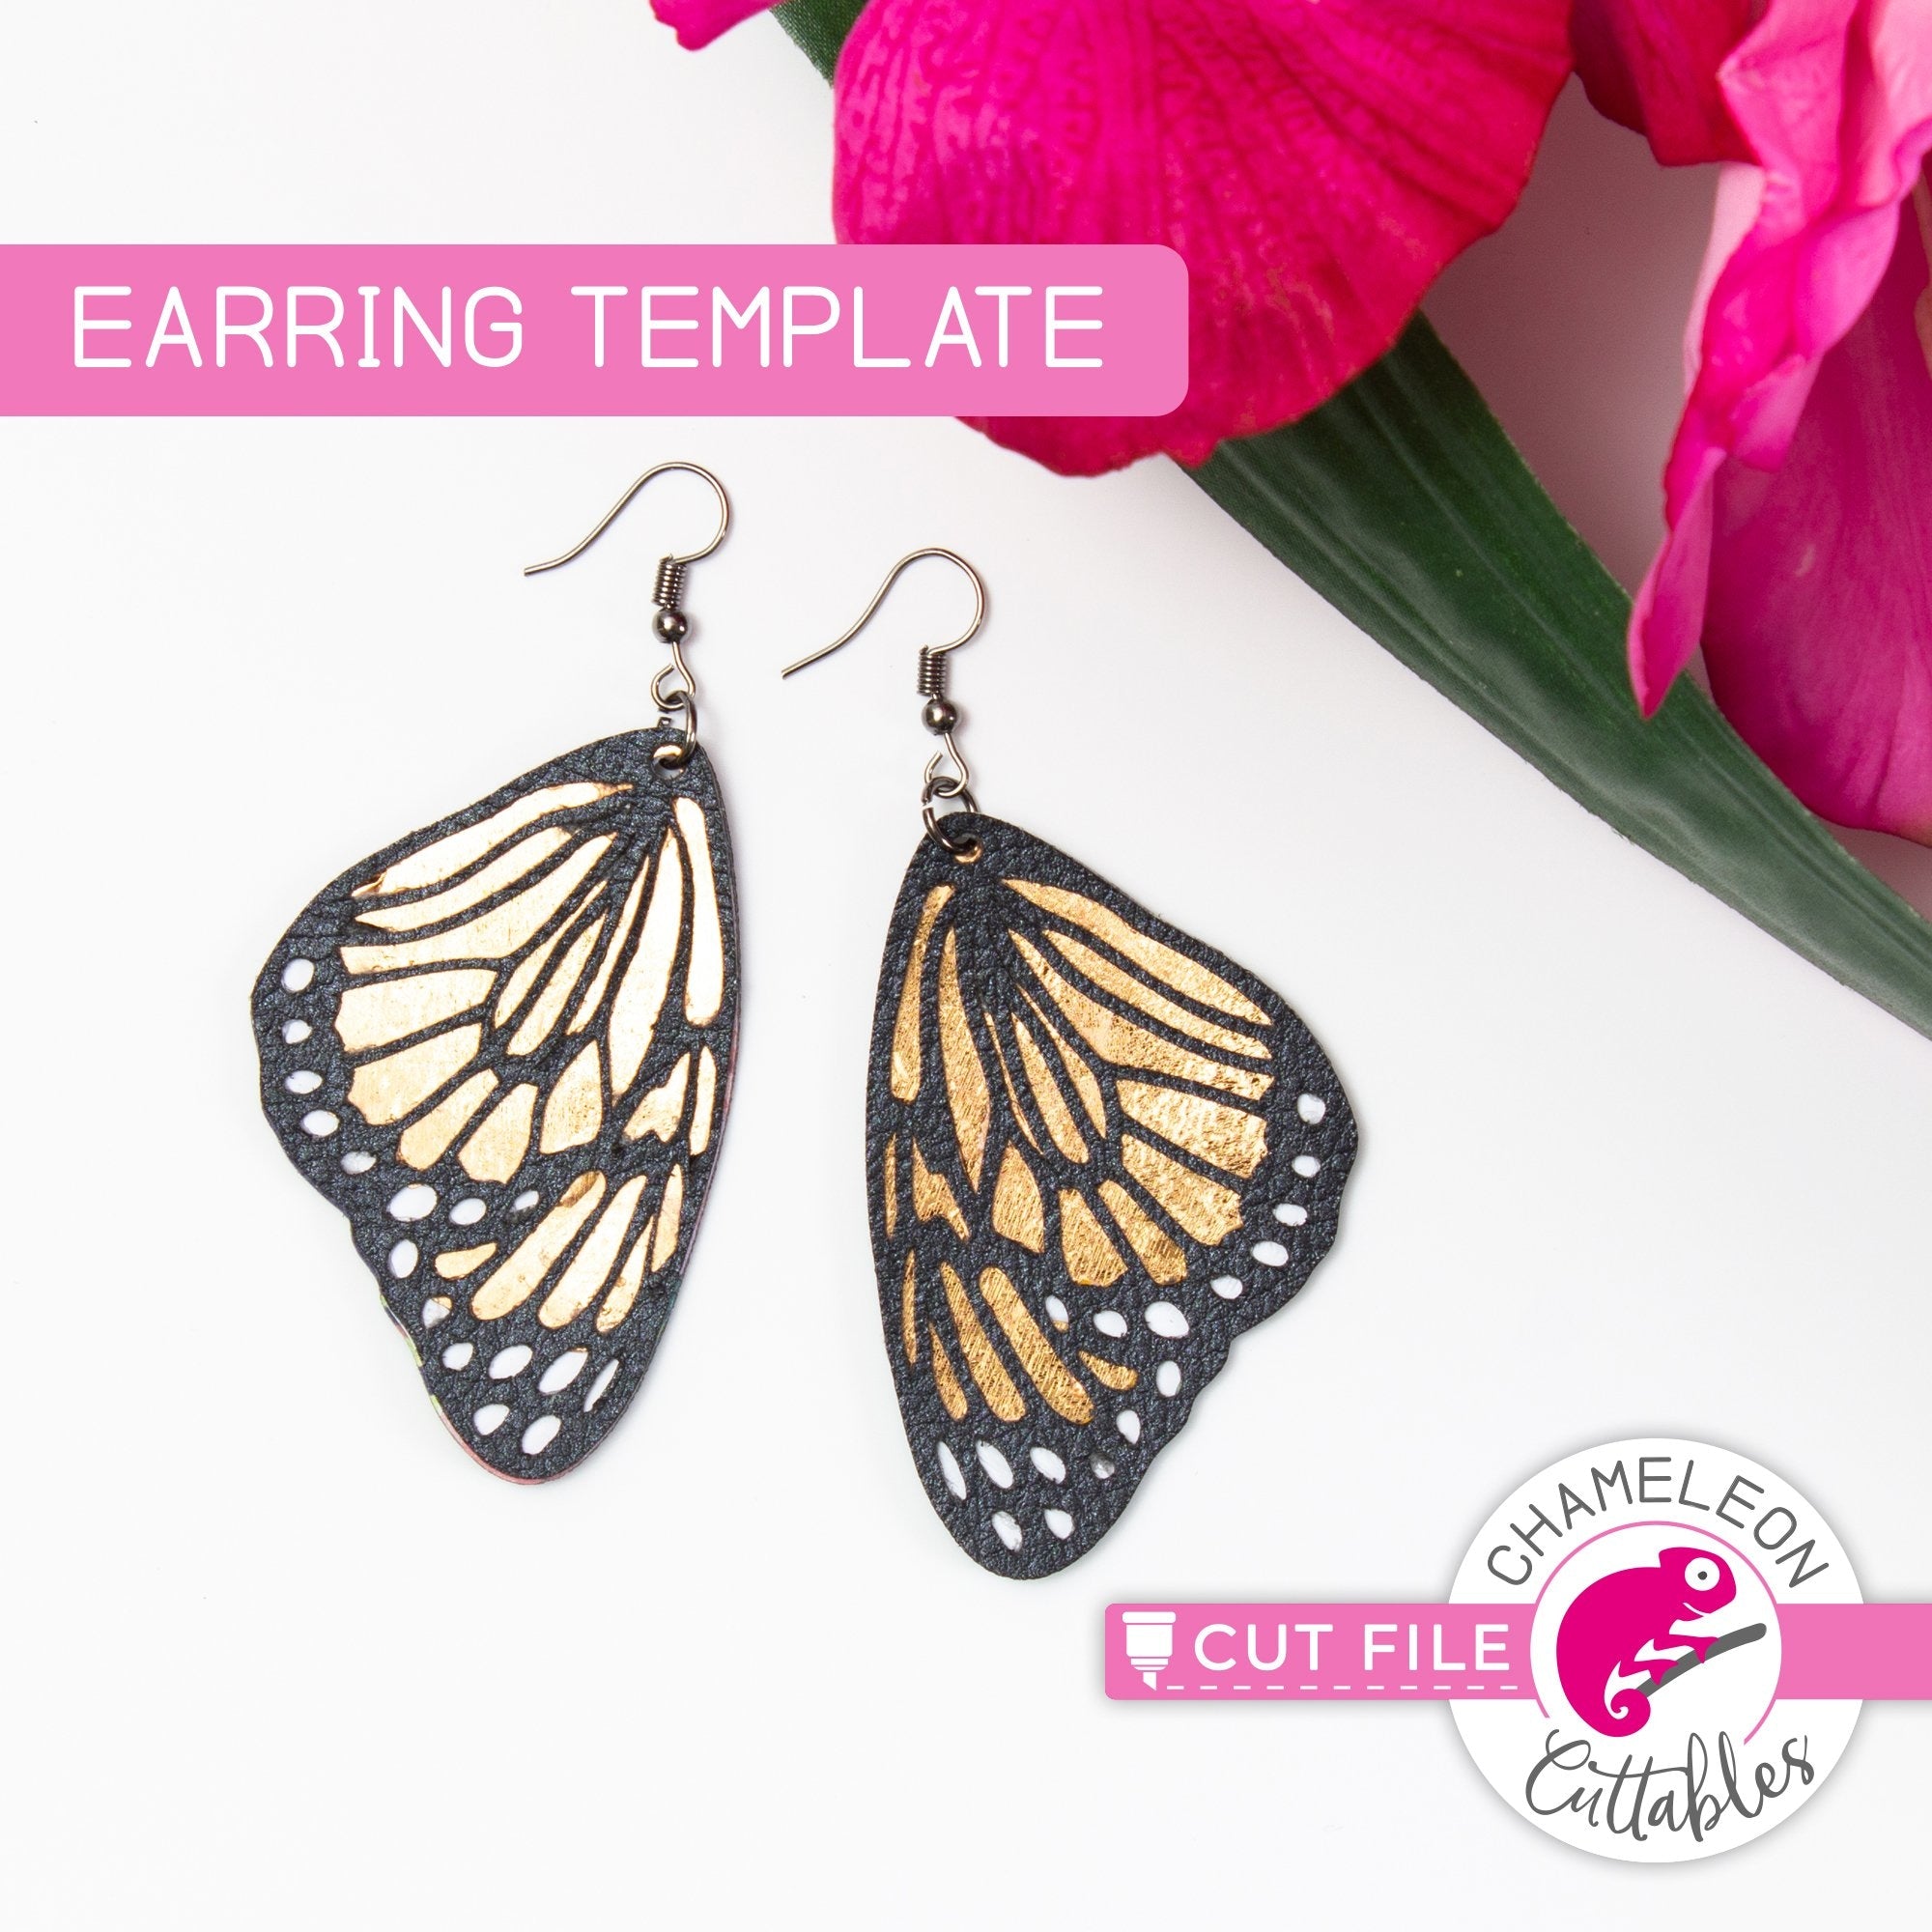 Download Butterfly Wing Earring Template Svg Png Dxf Eps Chameleon Cuttables Llc Chameleon Cuttables Llc